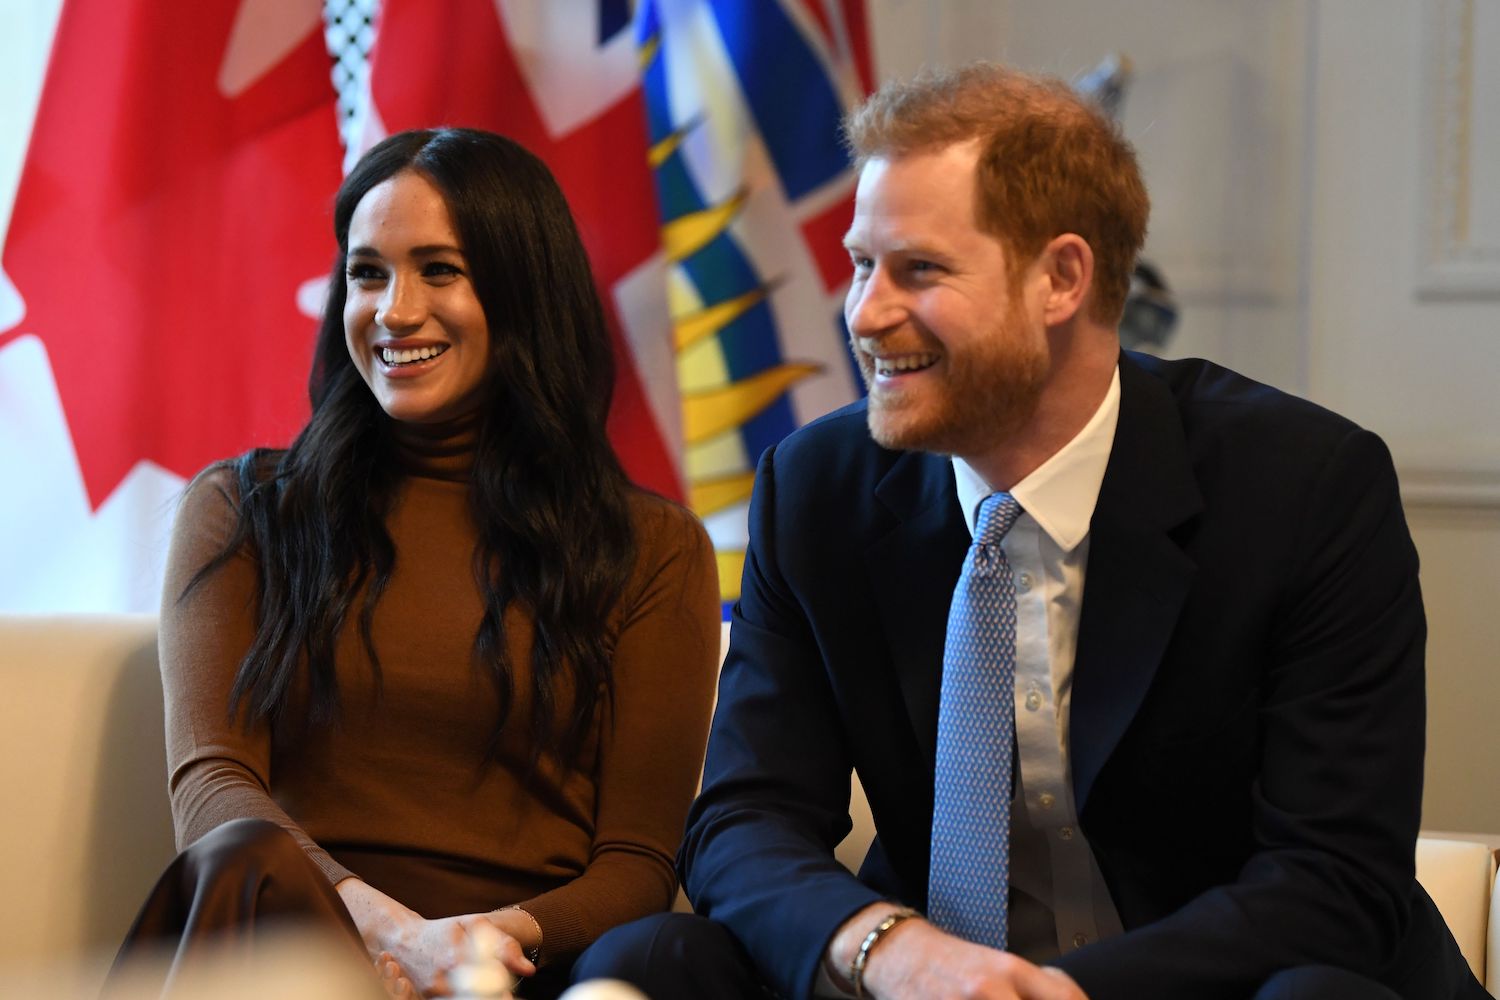 Prince Harry, Duke of Sussex and Meghan, Duchess of Sussex during their visit to Canada House in 2020